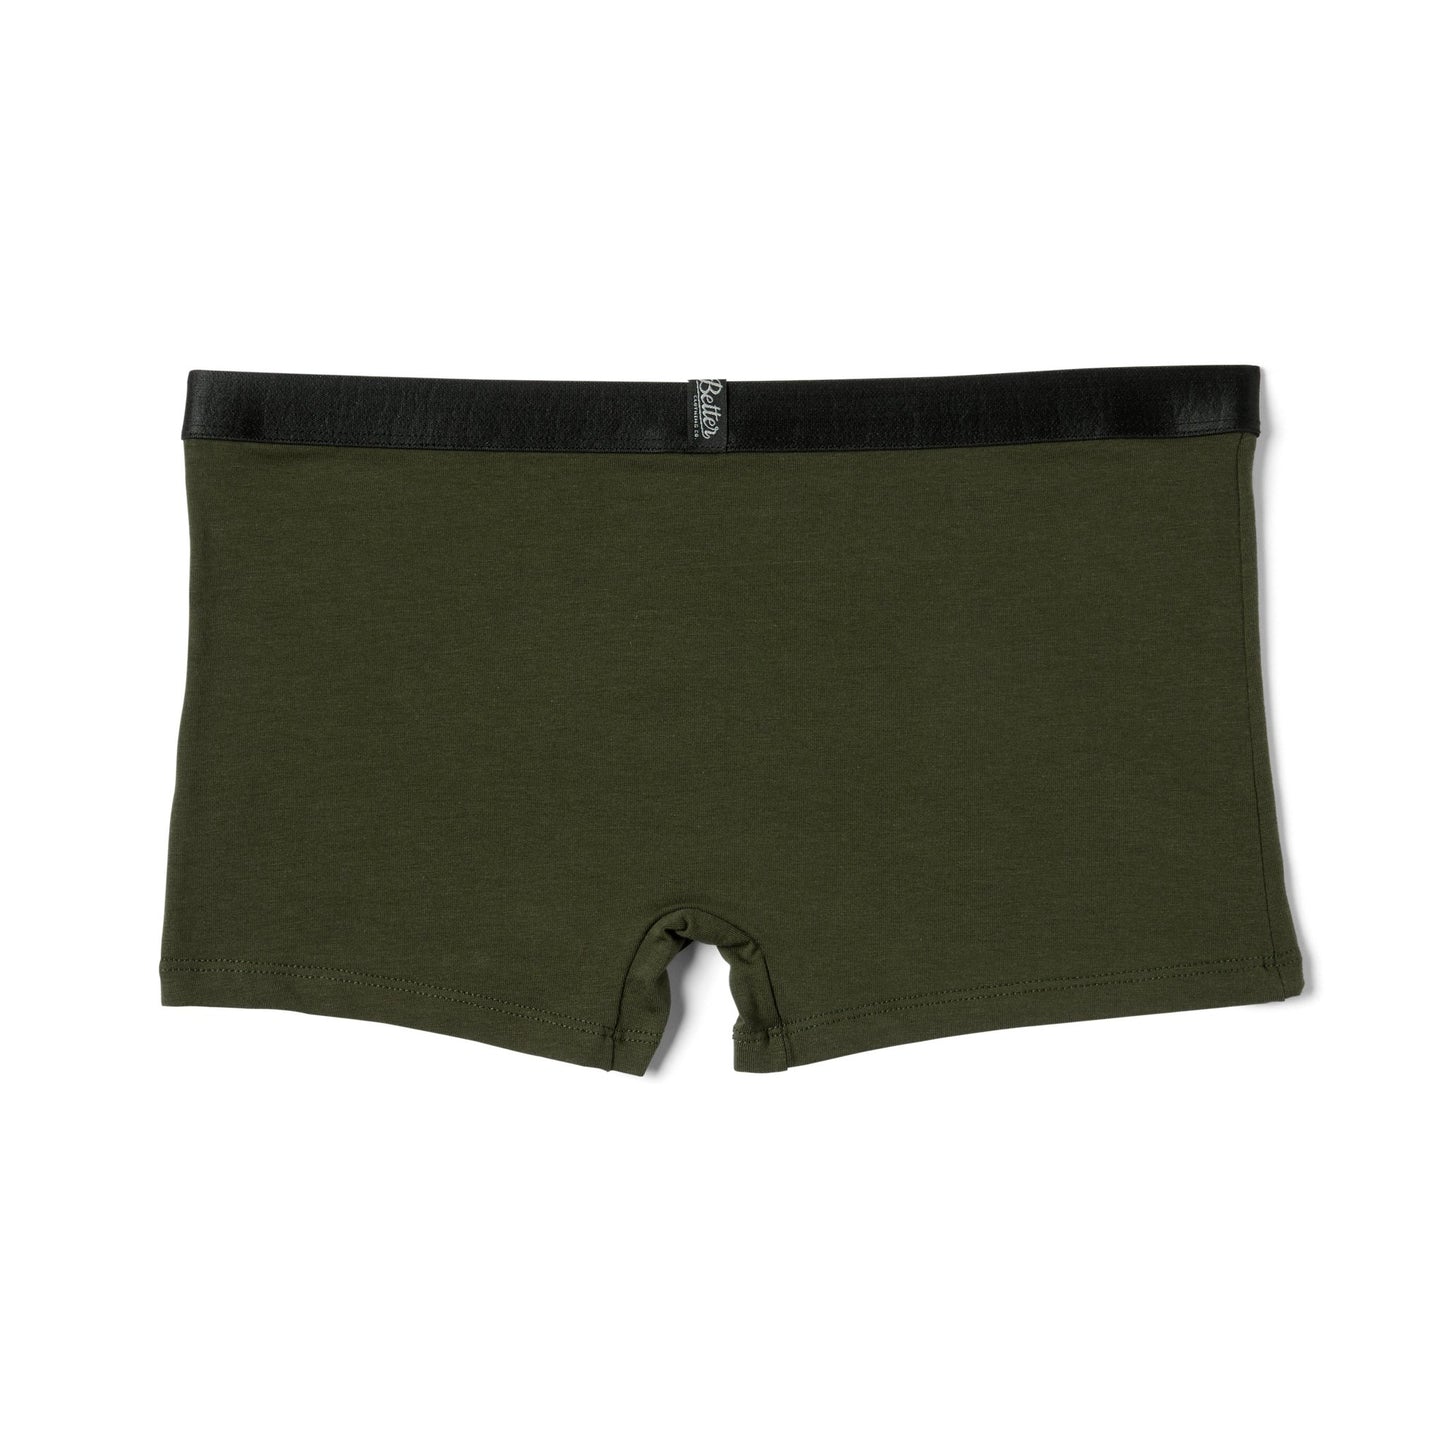 A super comfortable Better Cotton Boyshort from Better Clothing Company with a black waistband.